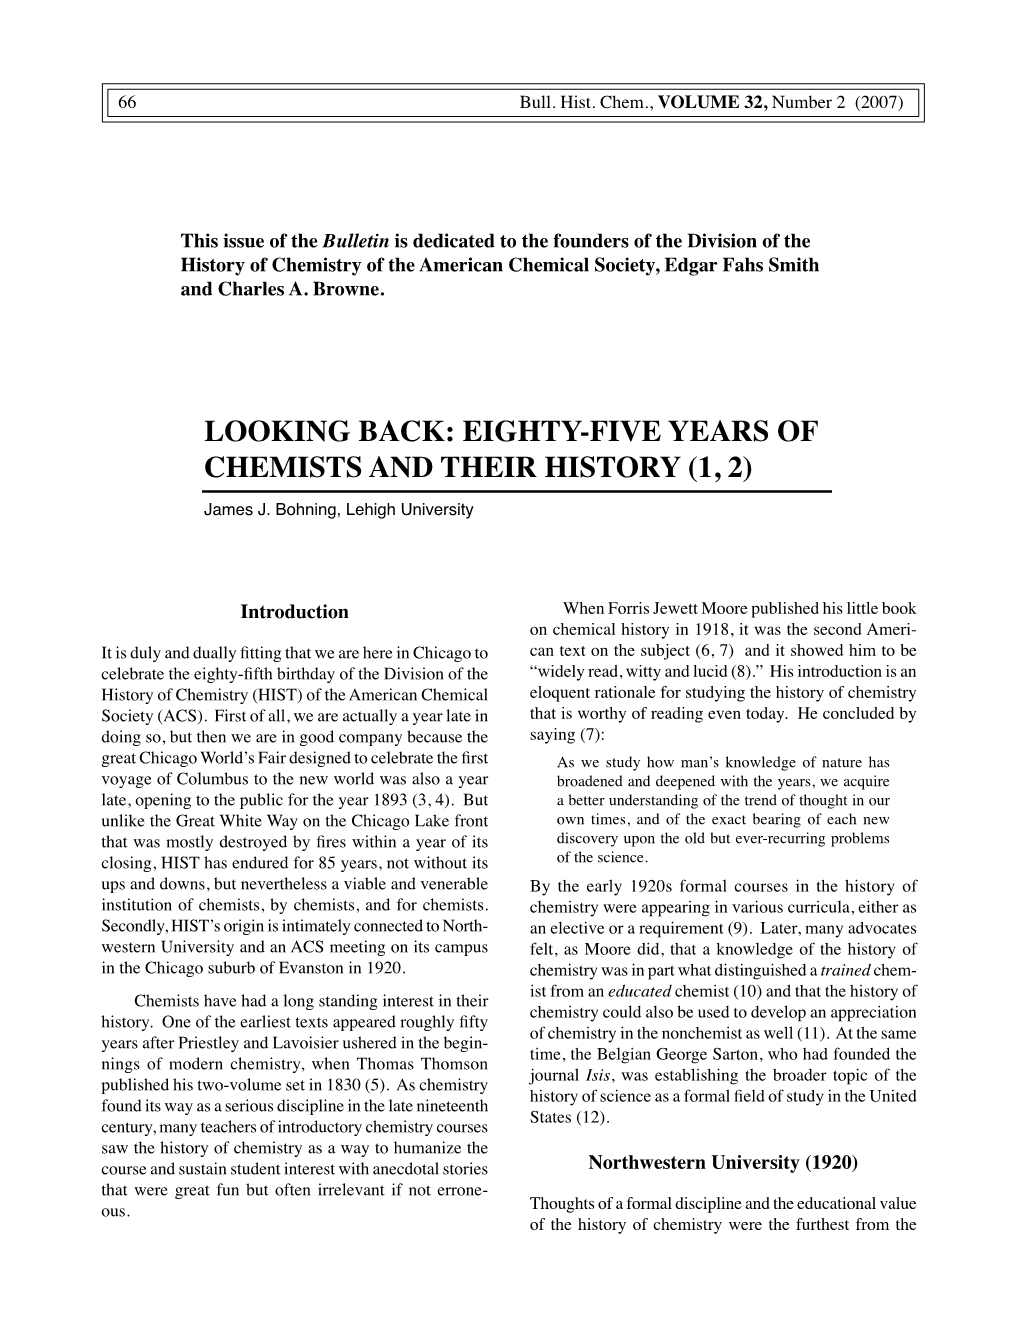 EIGHTY-FIVE YEARS of CHEMISTS and THEIR HISTORY (1, 2) James J